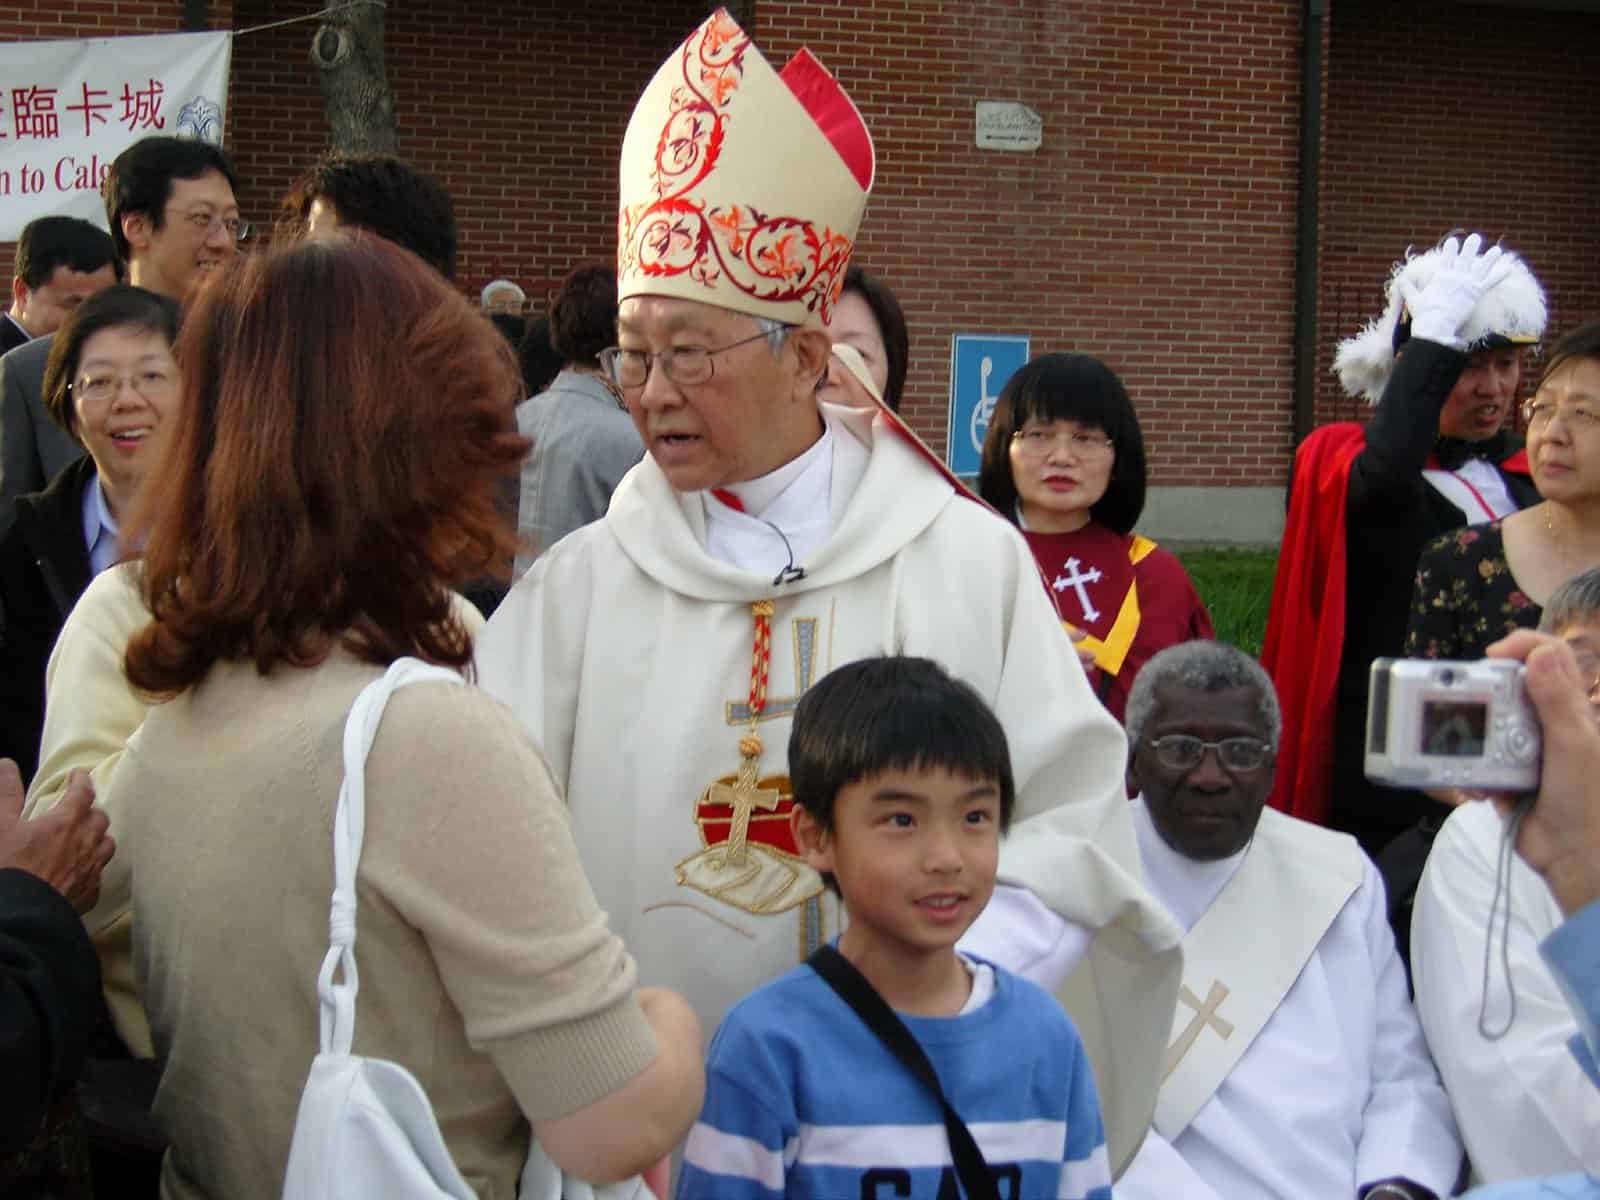 A Catholic cardinal of seemingly Asian decent stands in a crowd speaking to a woman